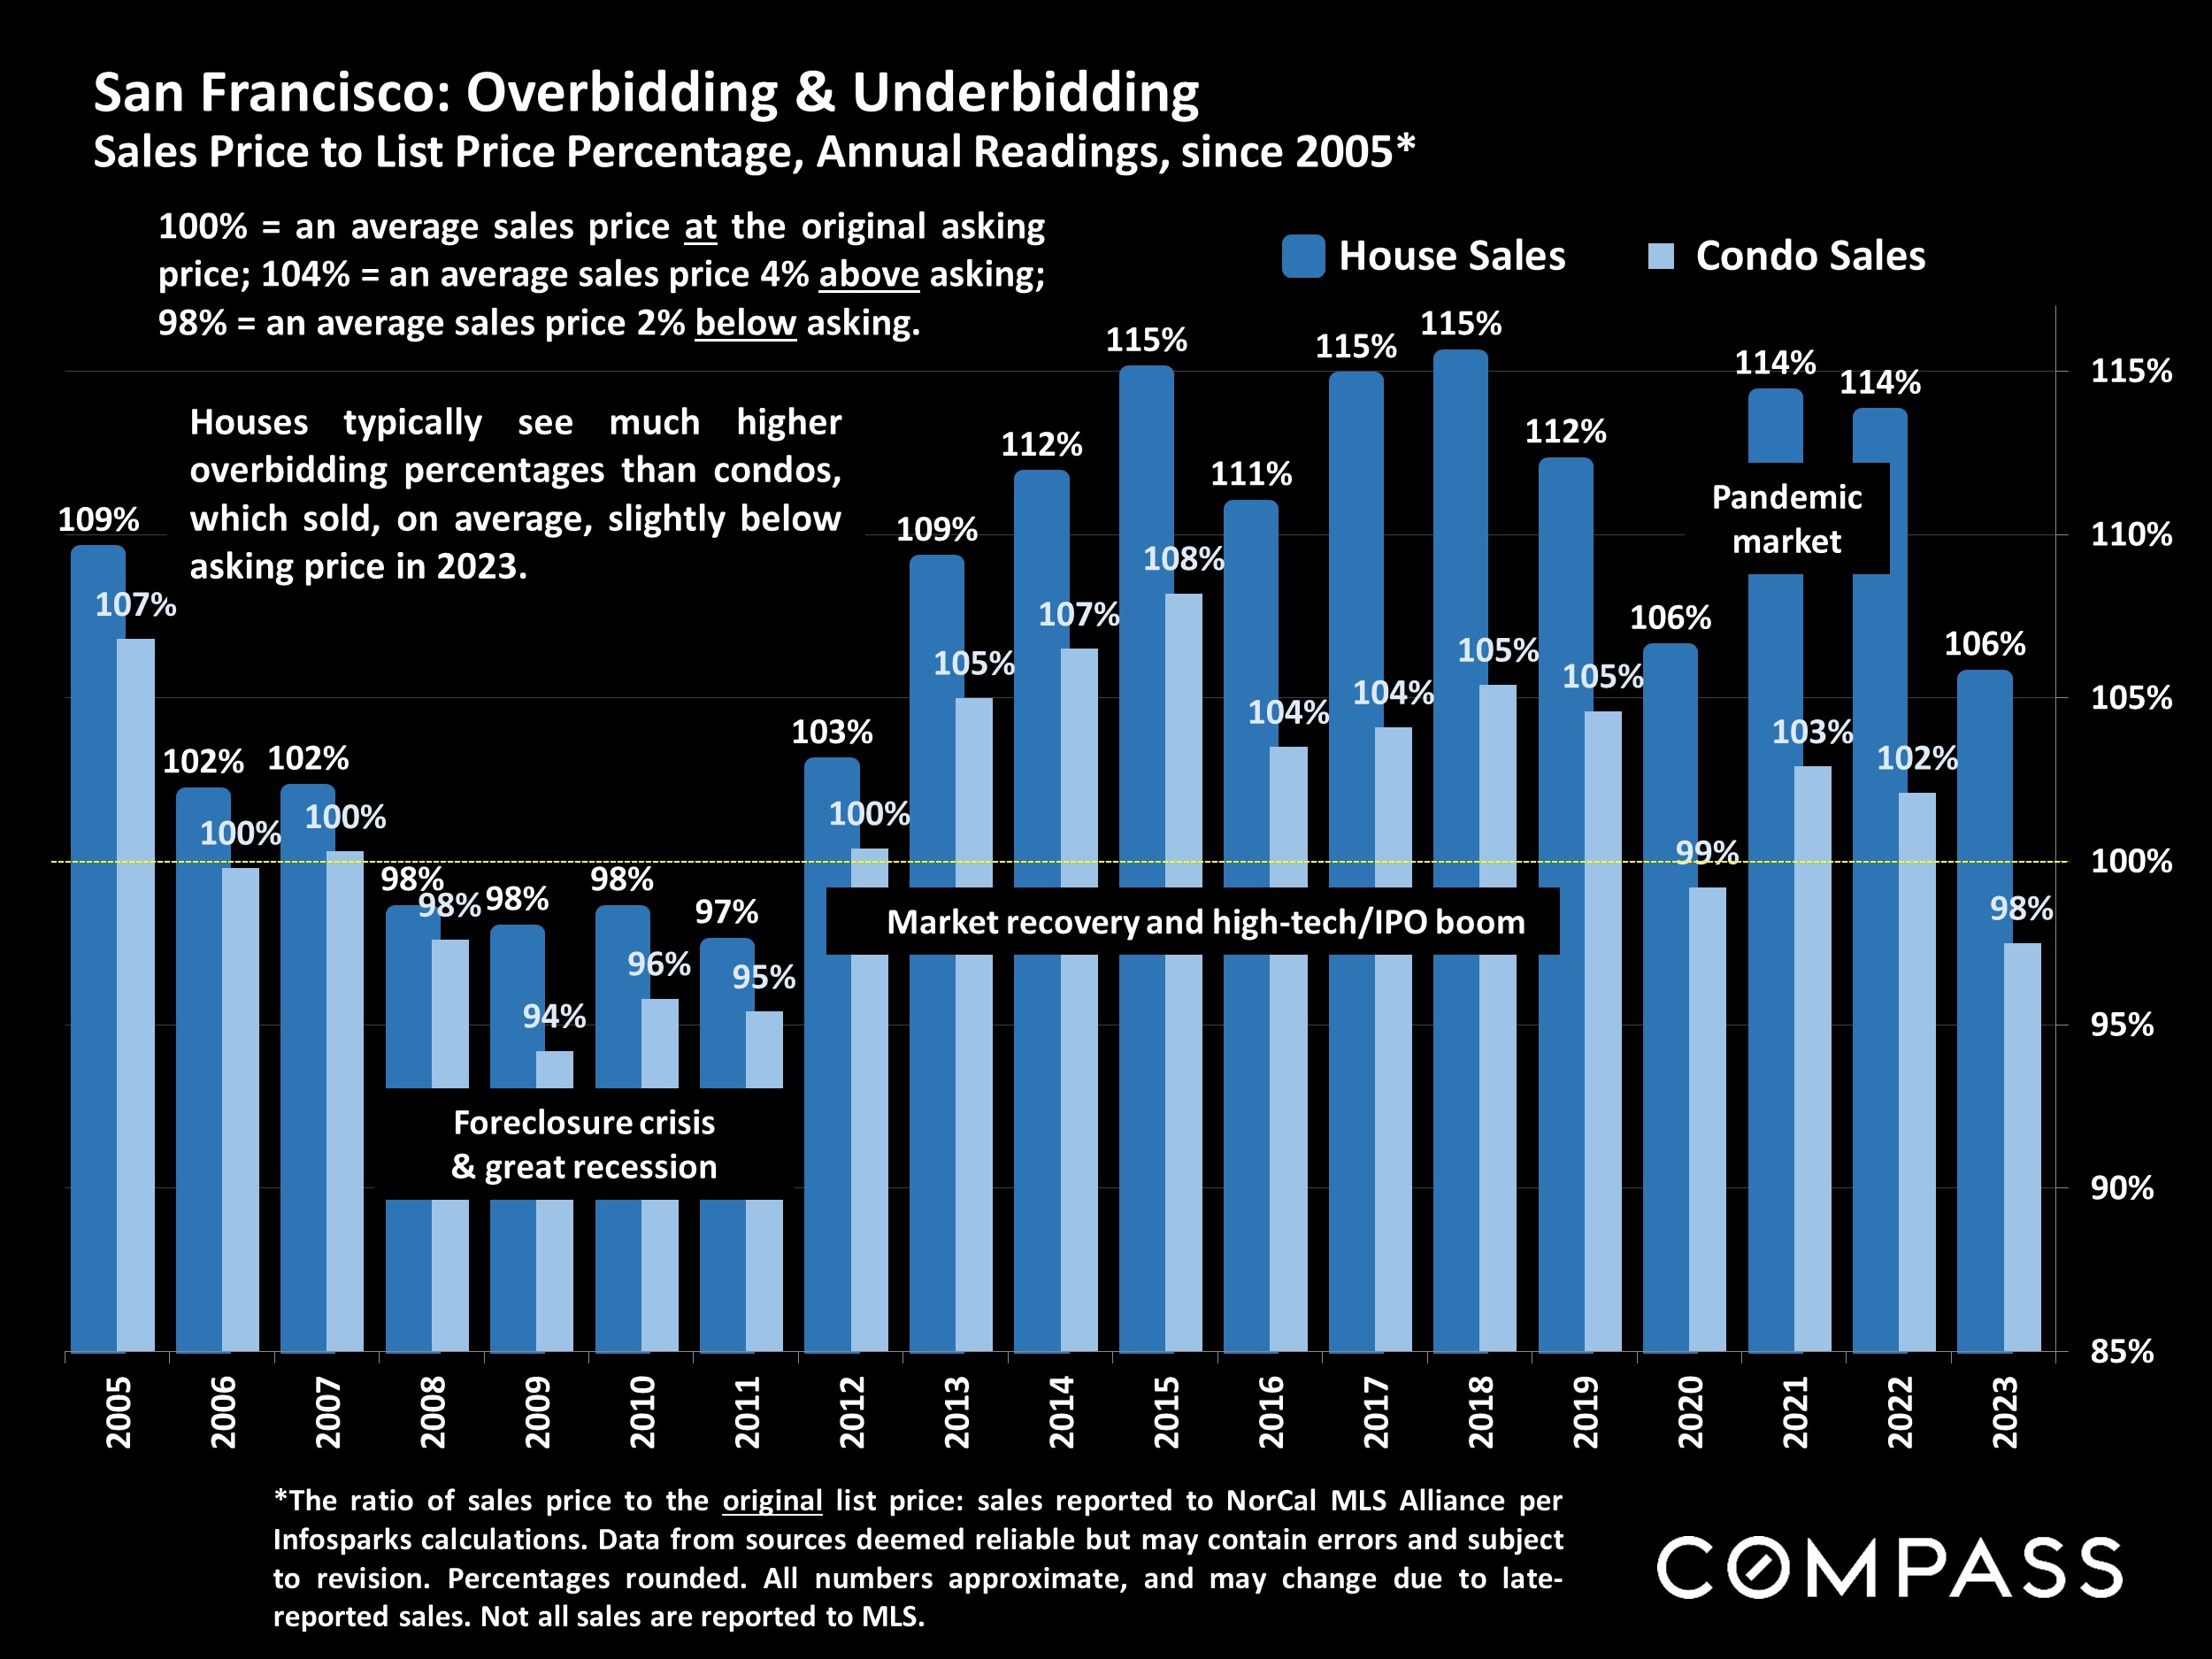 San Francisco: Overbidding & Underbidding Sales Price to List Price Percentage, Annual Readings, since 2005*